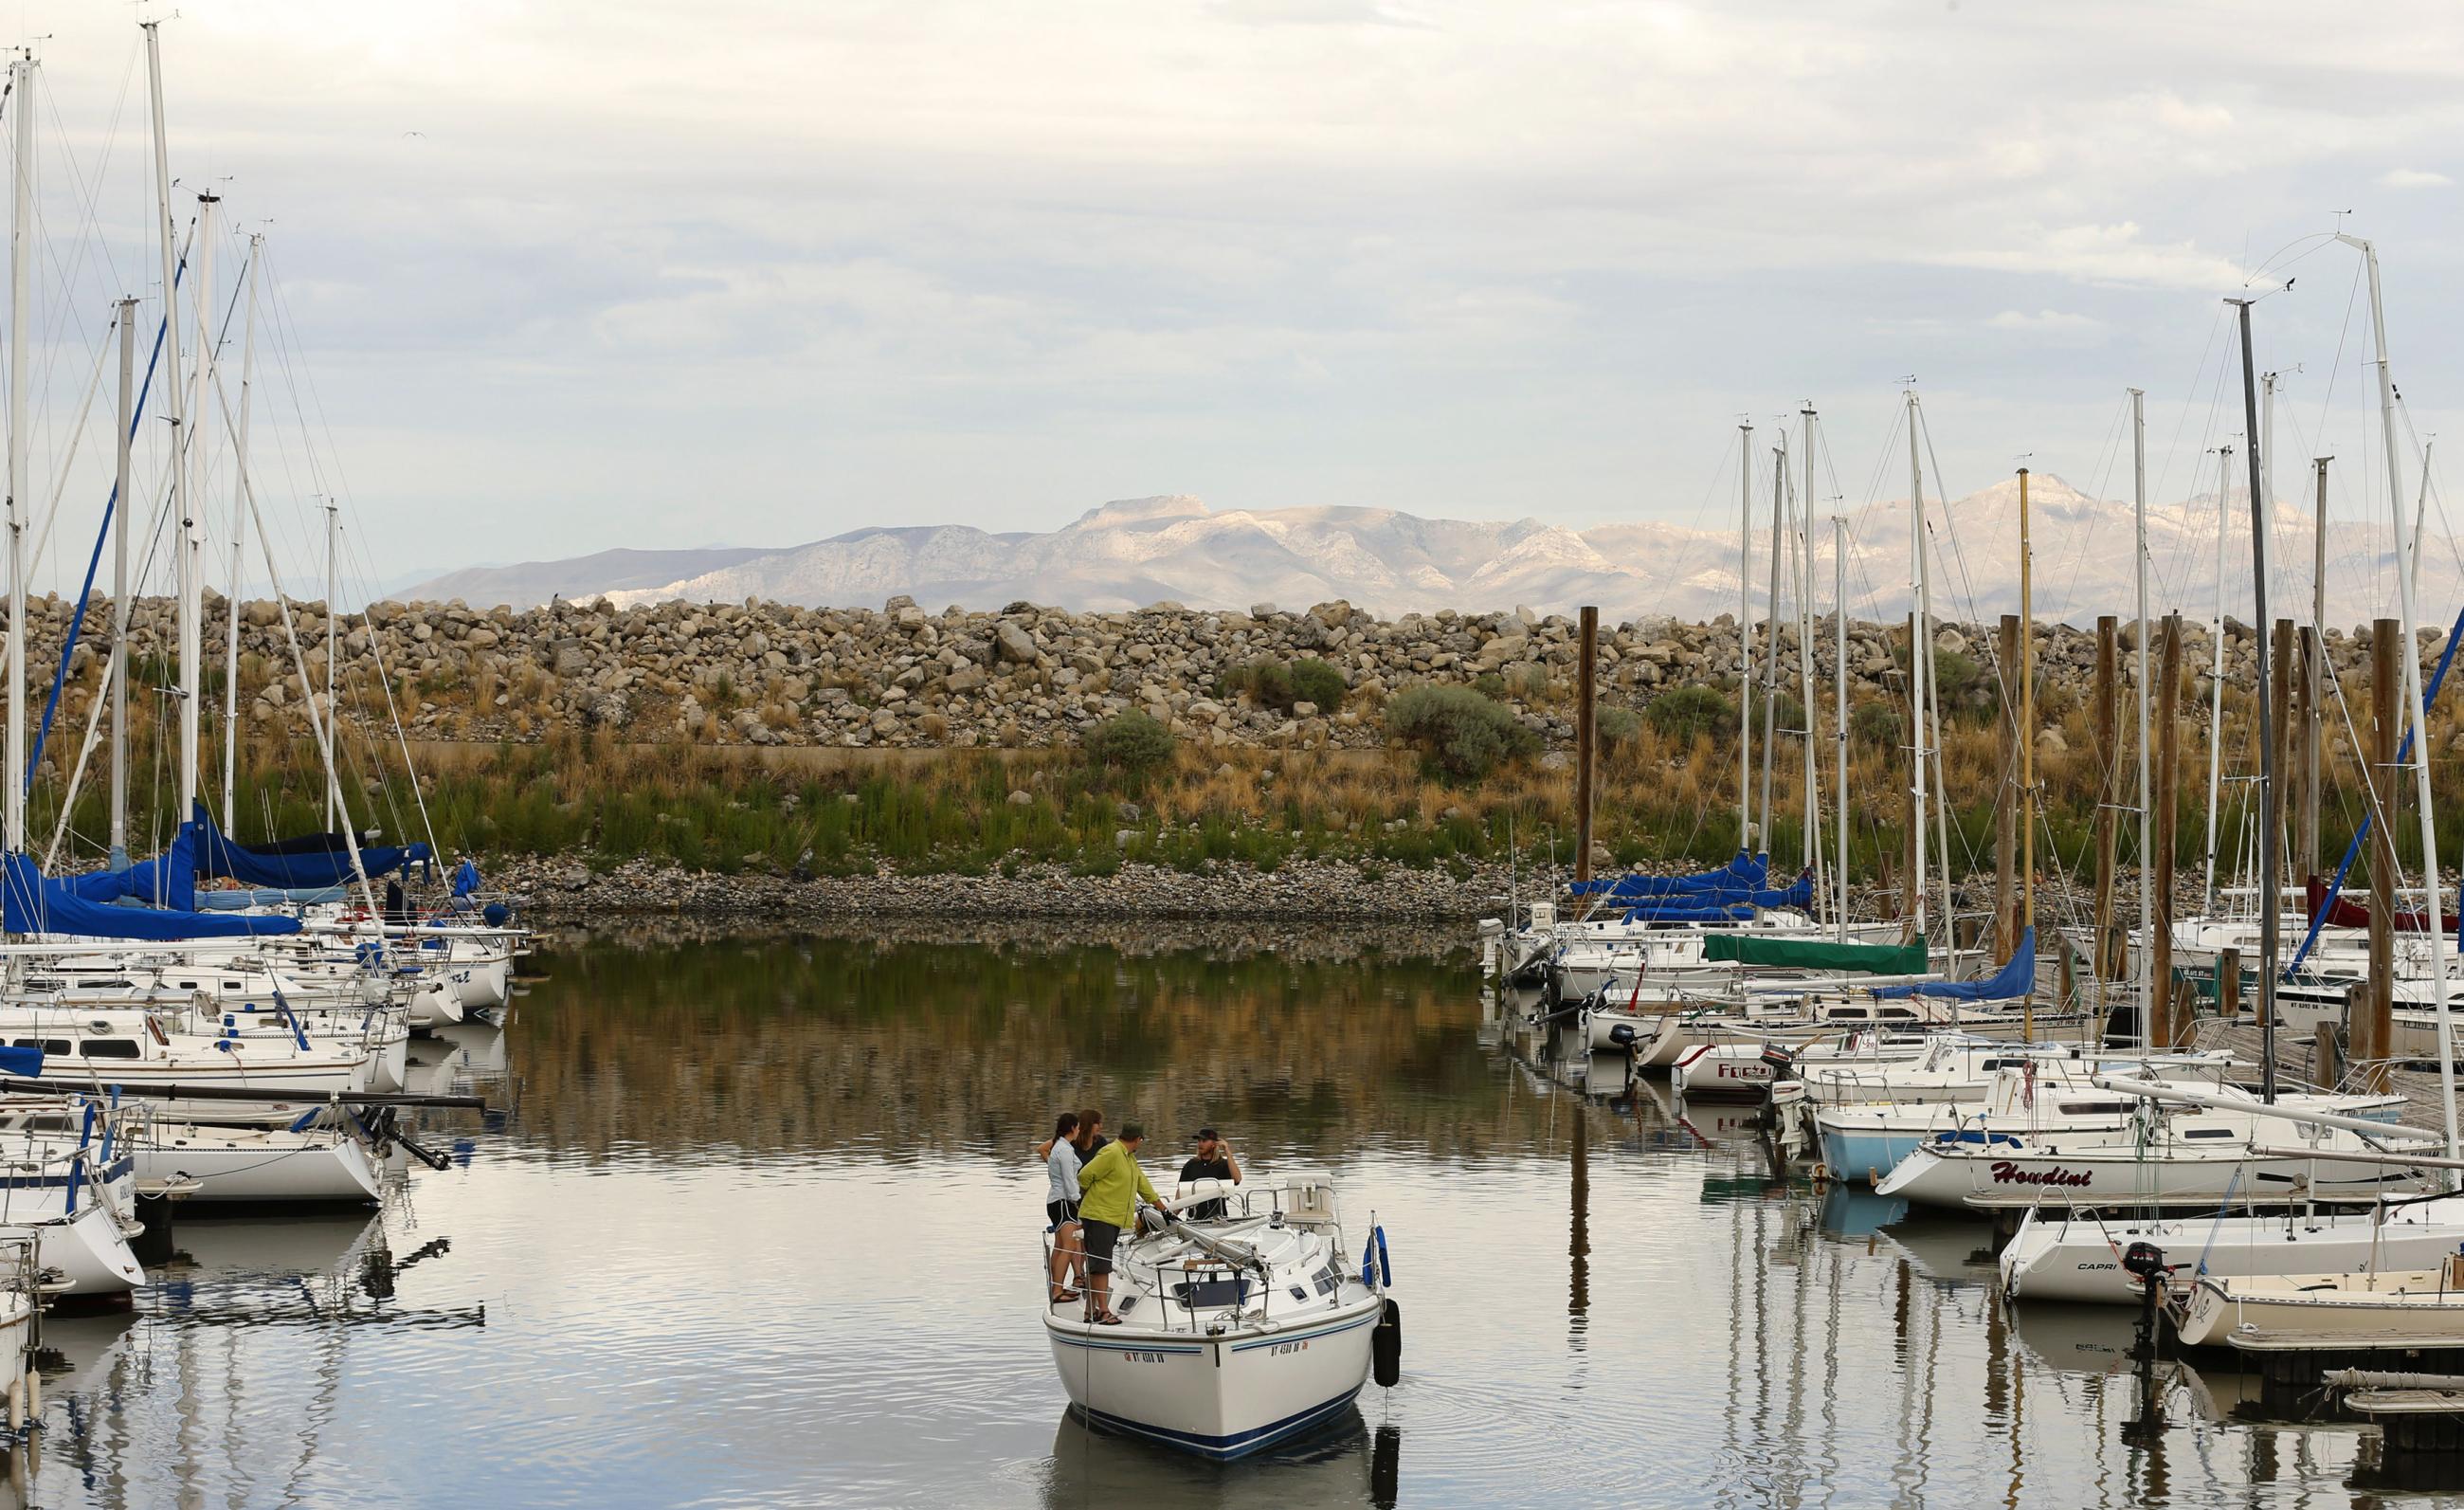 People move their boat into place to be lifted out of the water by a large crane at the Great Salt Lake Marina because of low water levels.